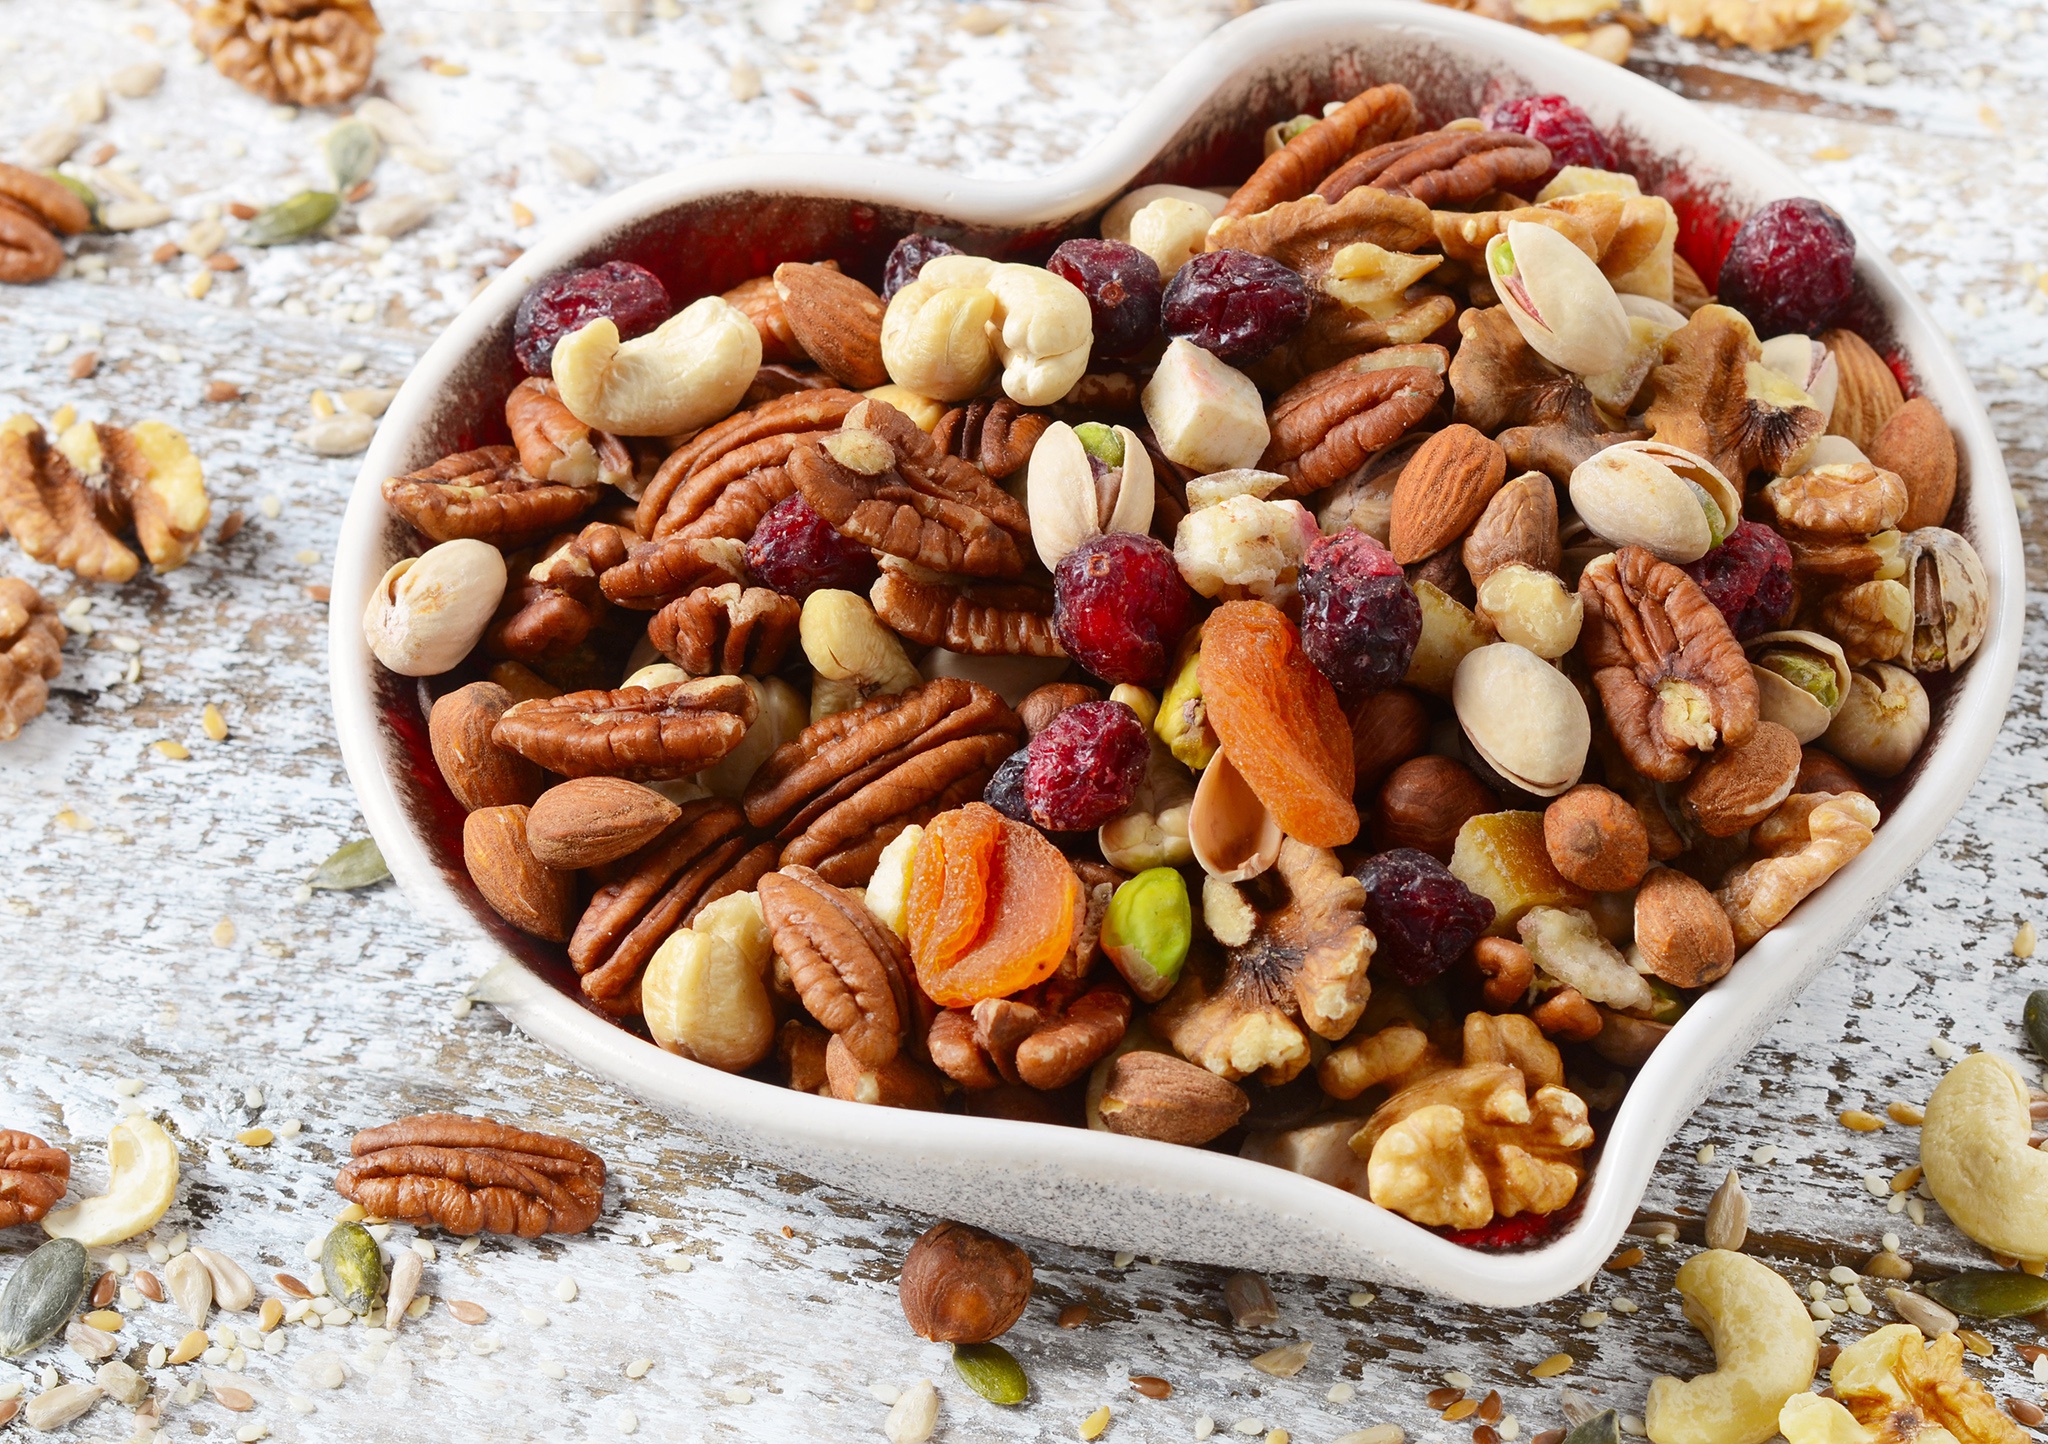 Download wallpaper heart, nuts, raisins, dried fruits, section food in reso...